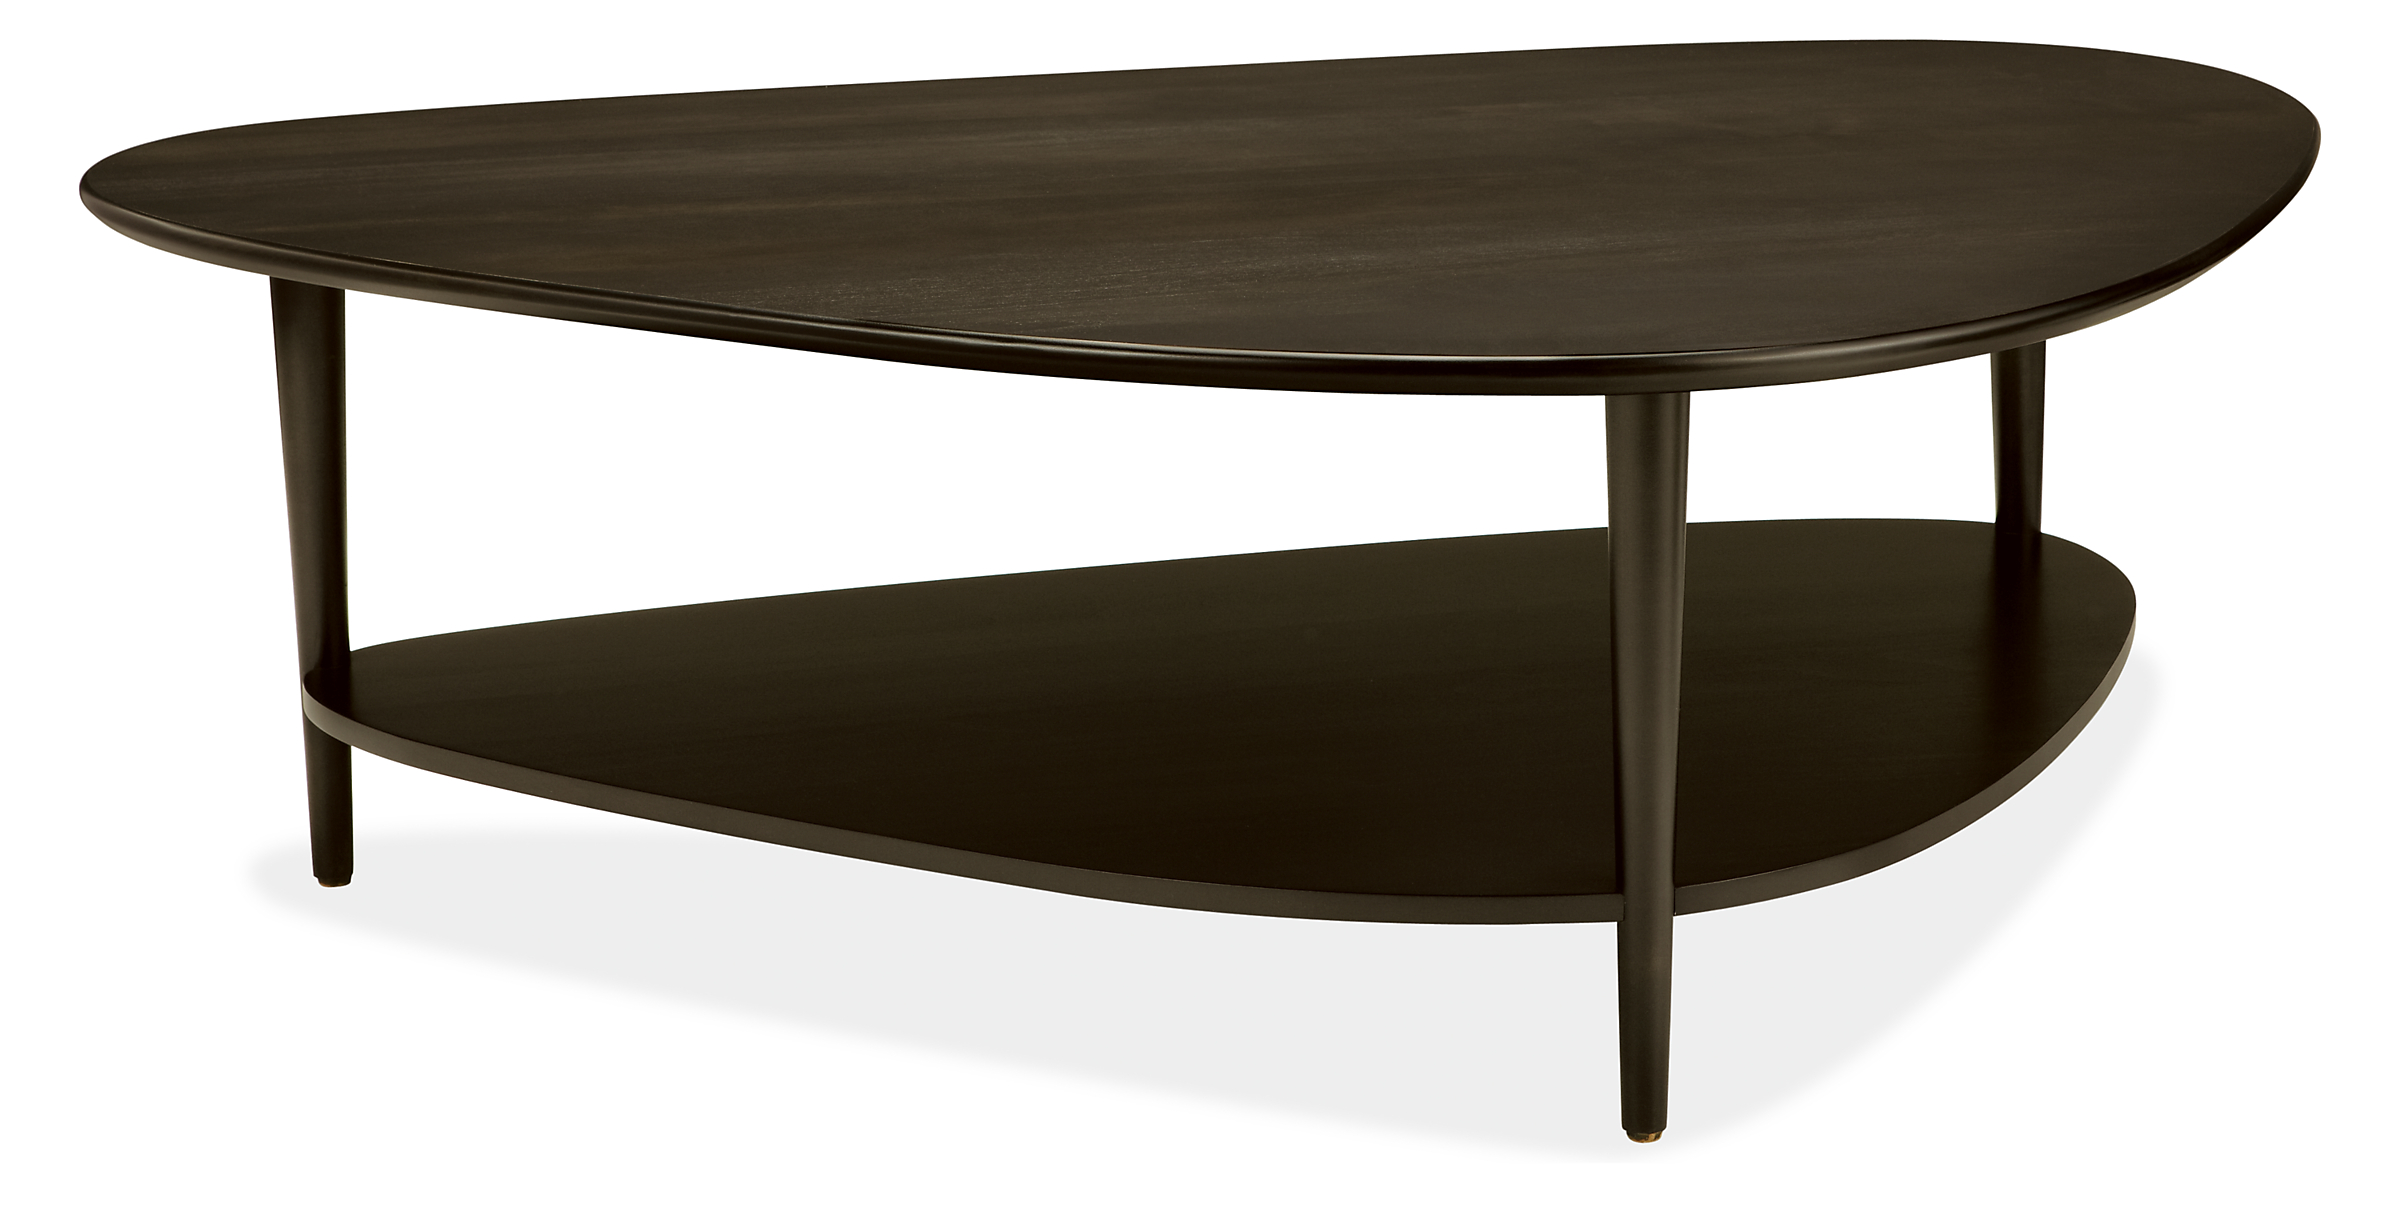 Gibson 50w 36d 16h Coffee Table